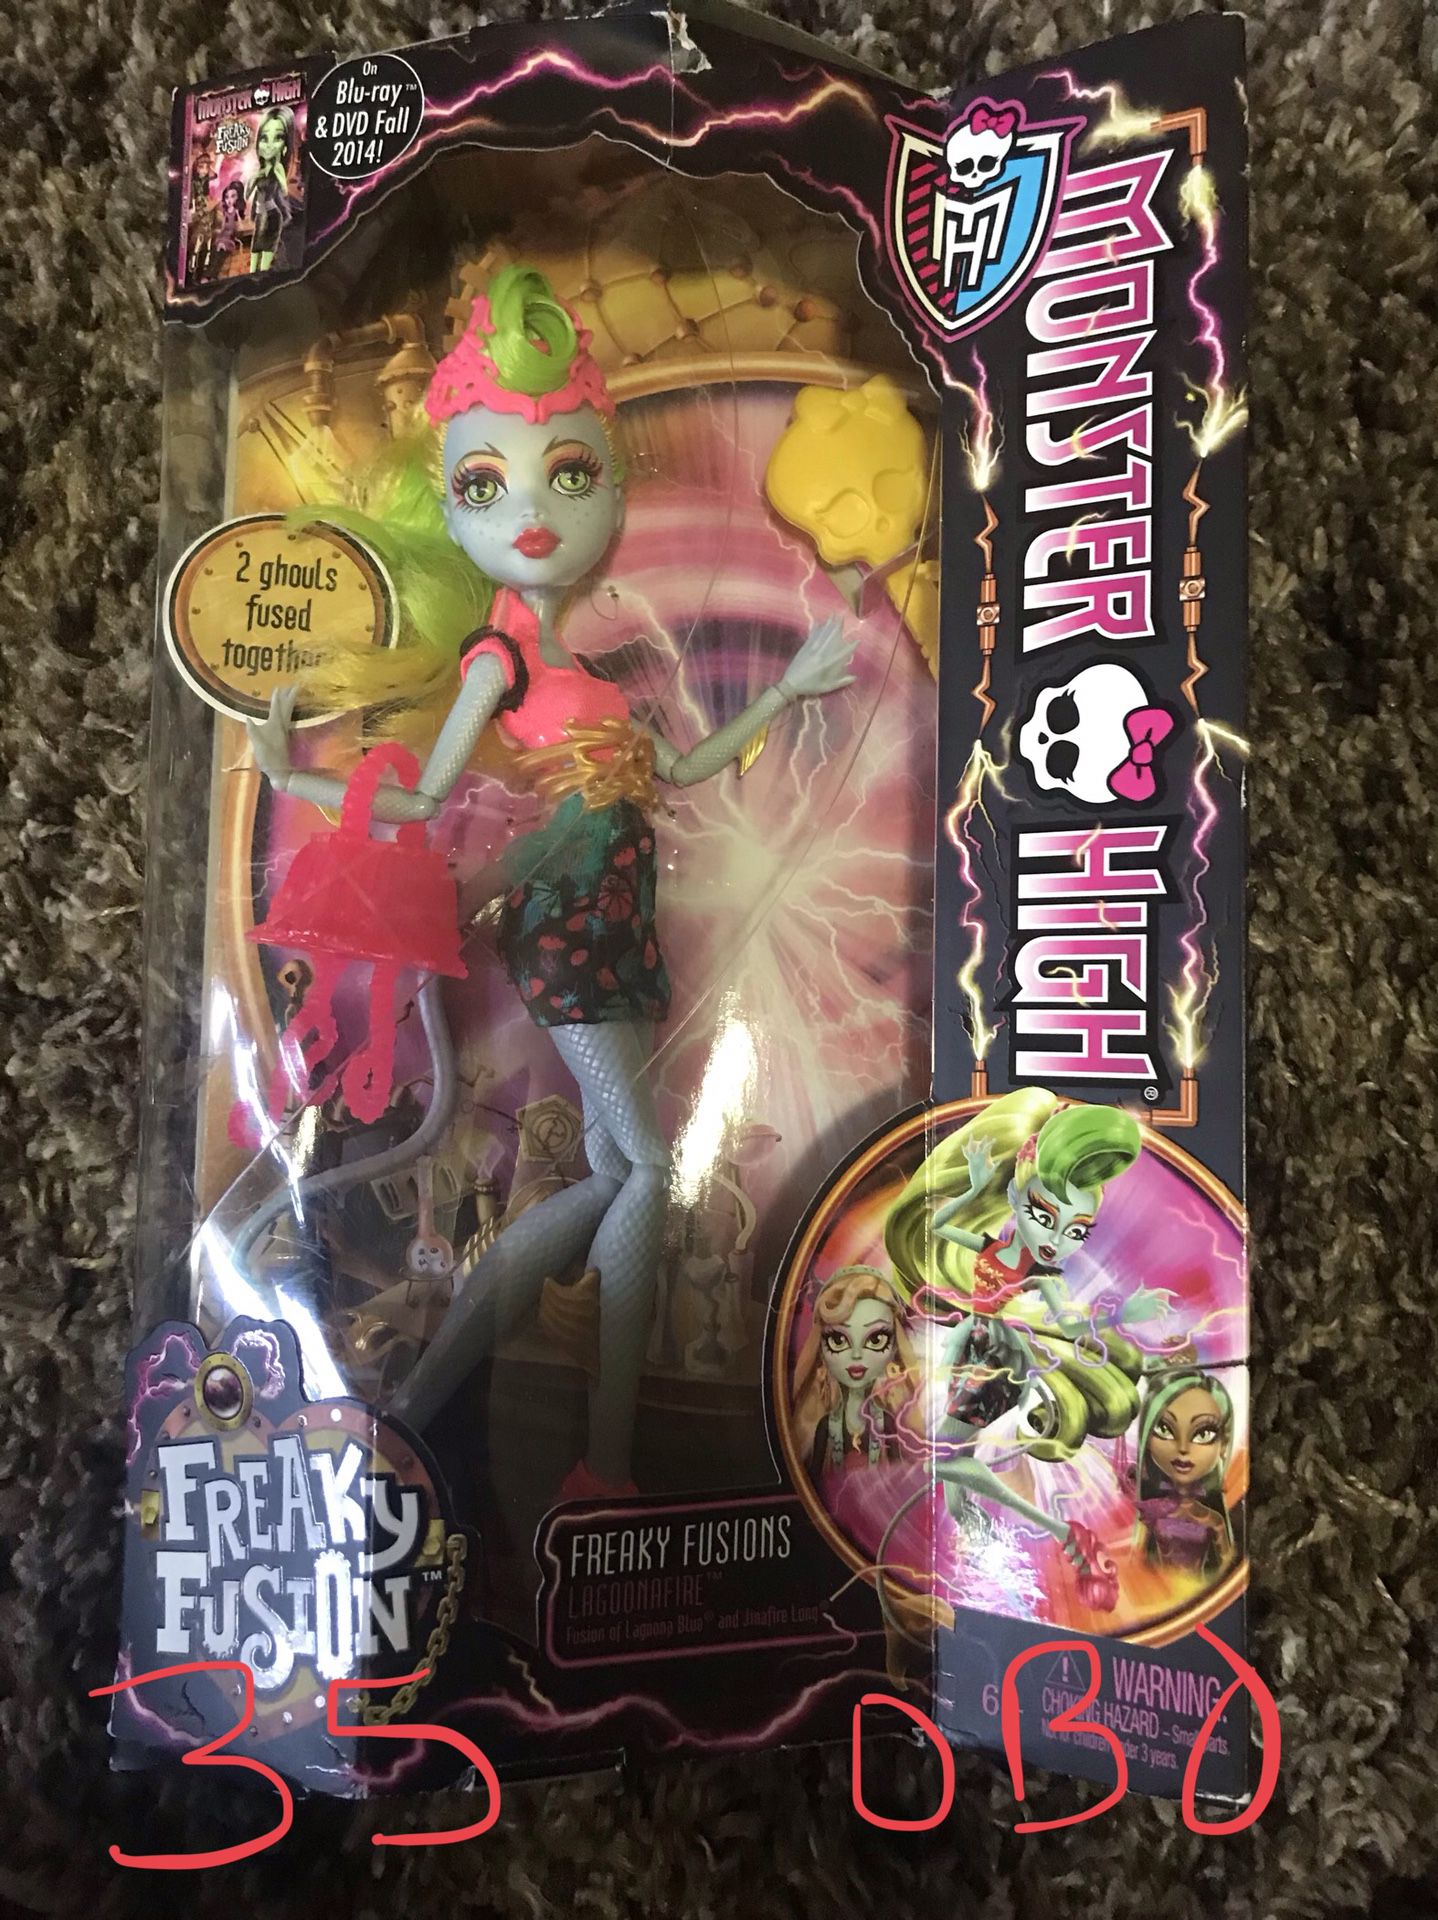 Freaky fusion monster high doll. Discontinued